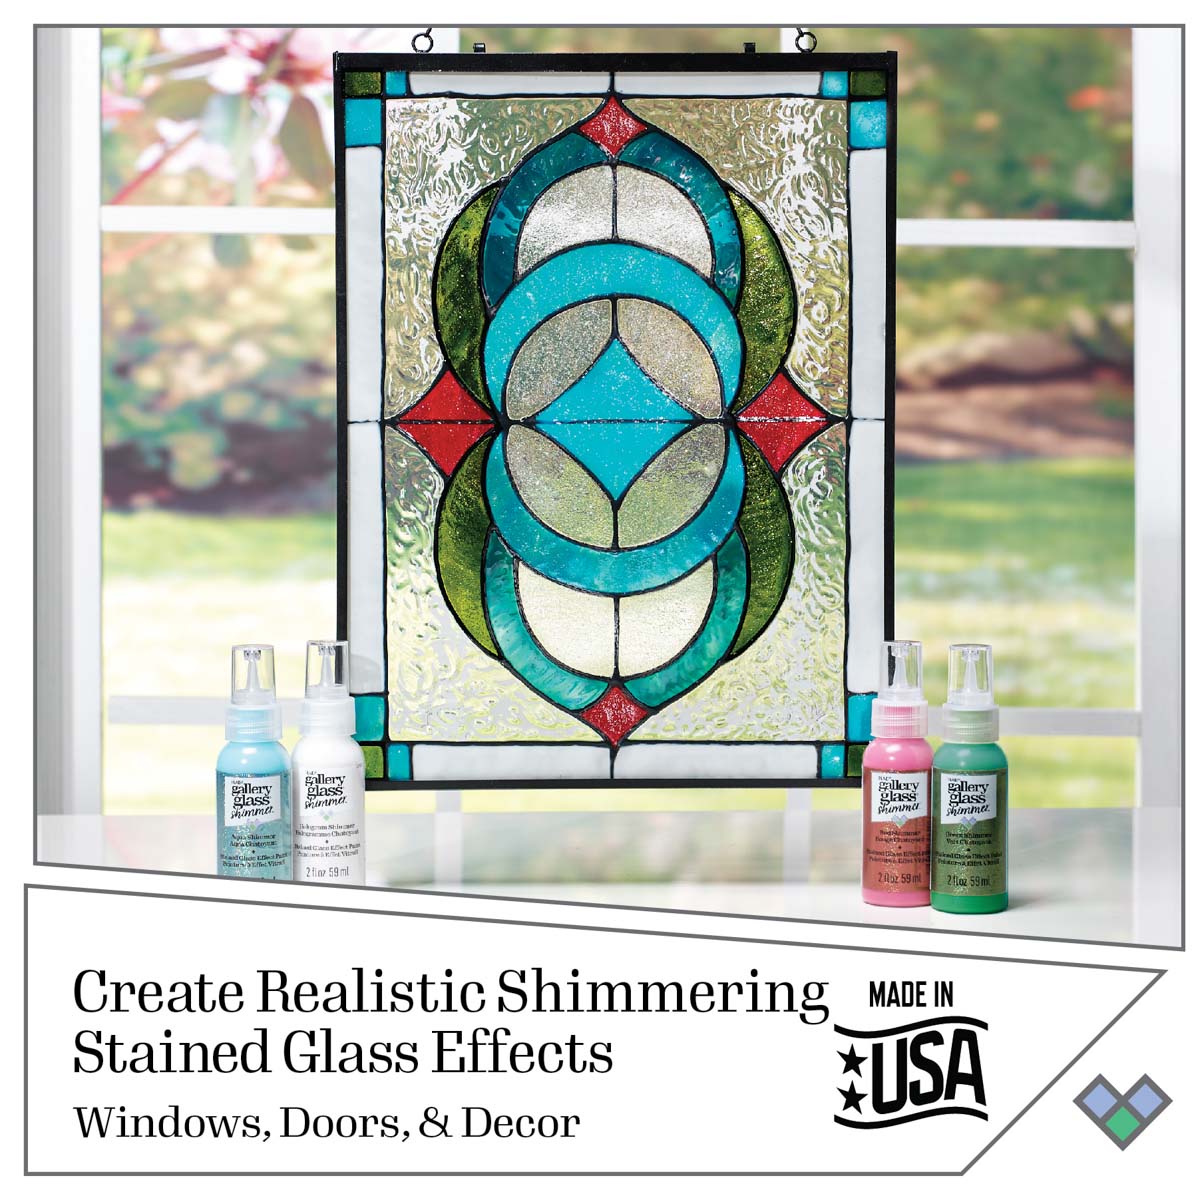 Shop Plaid Gallery Glass ® Stained Glass Effect Paint - Peach Tea, 2 oz. -  19782 - 19782